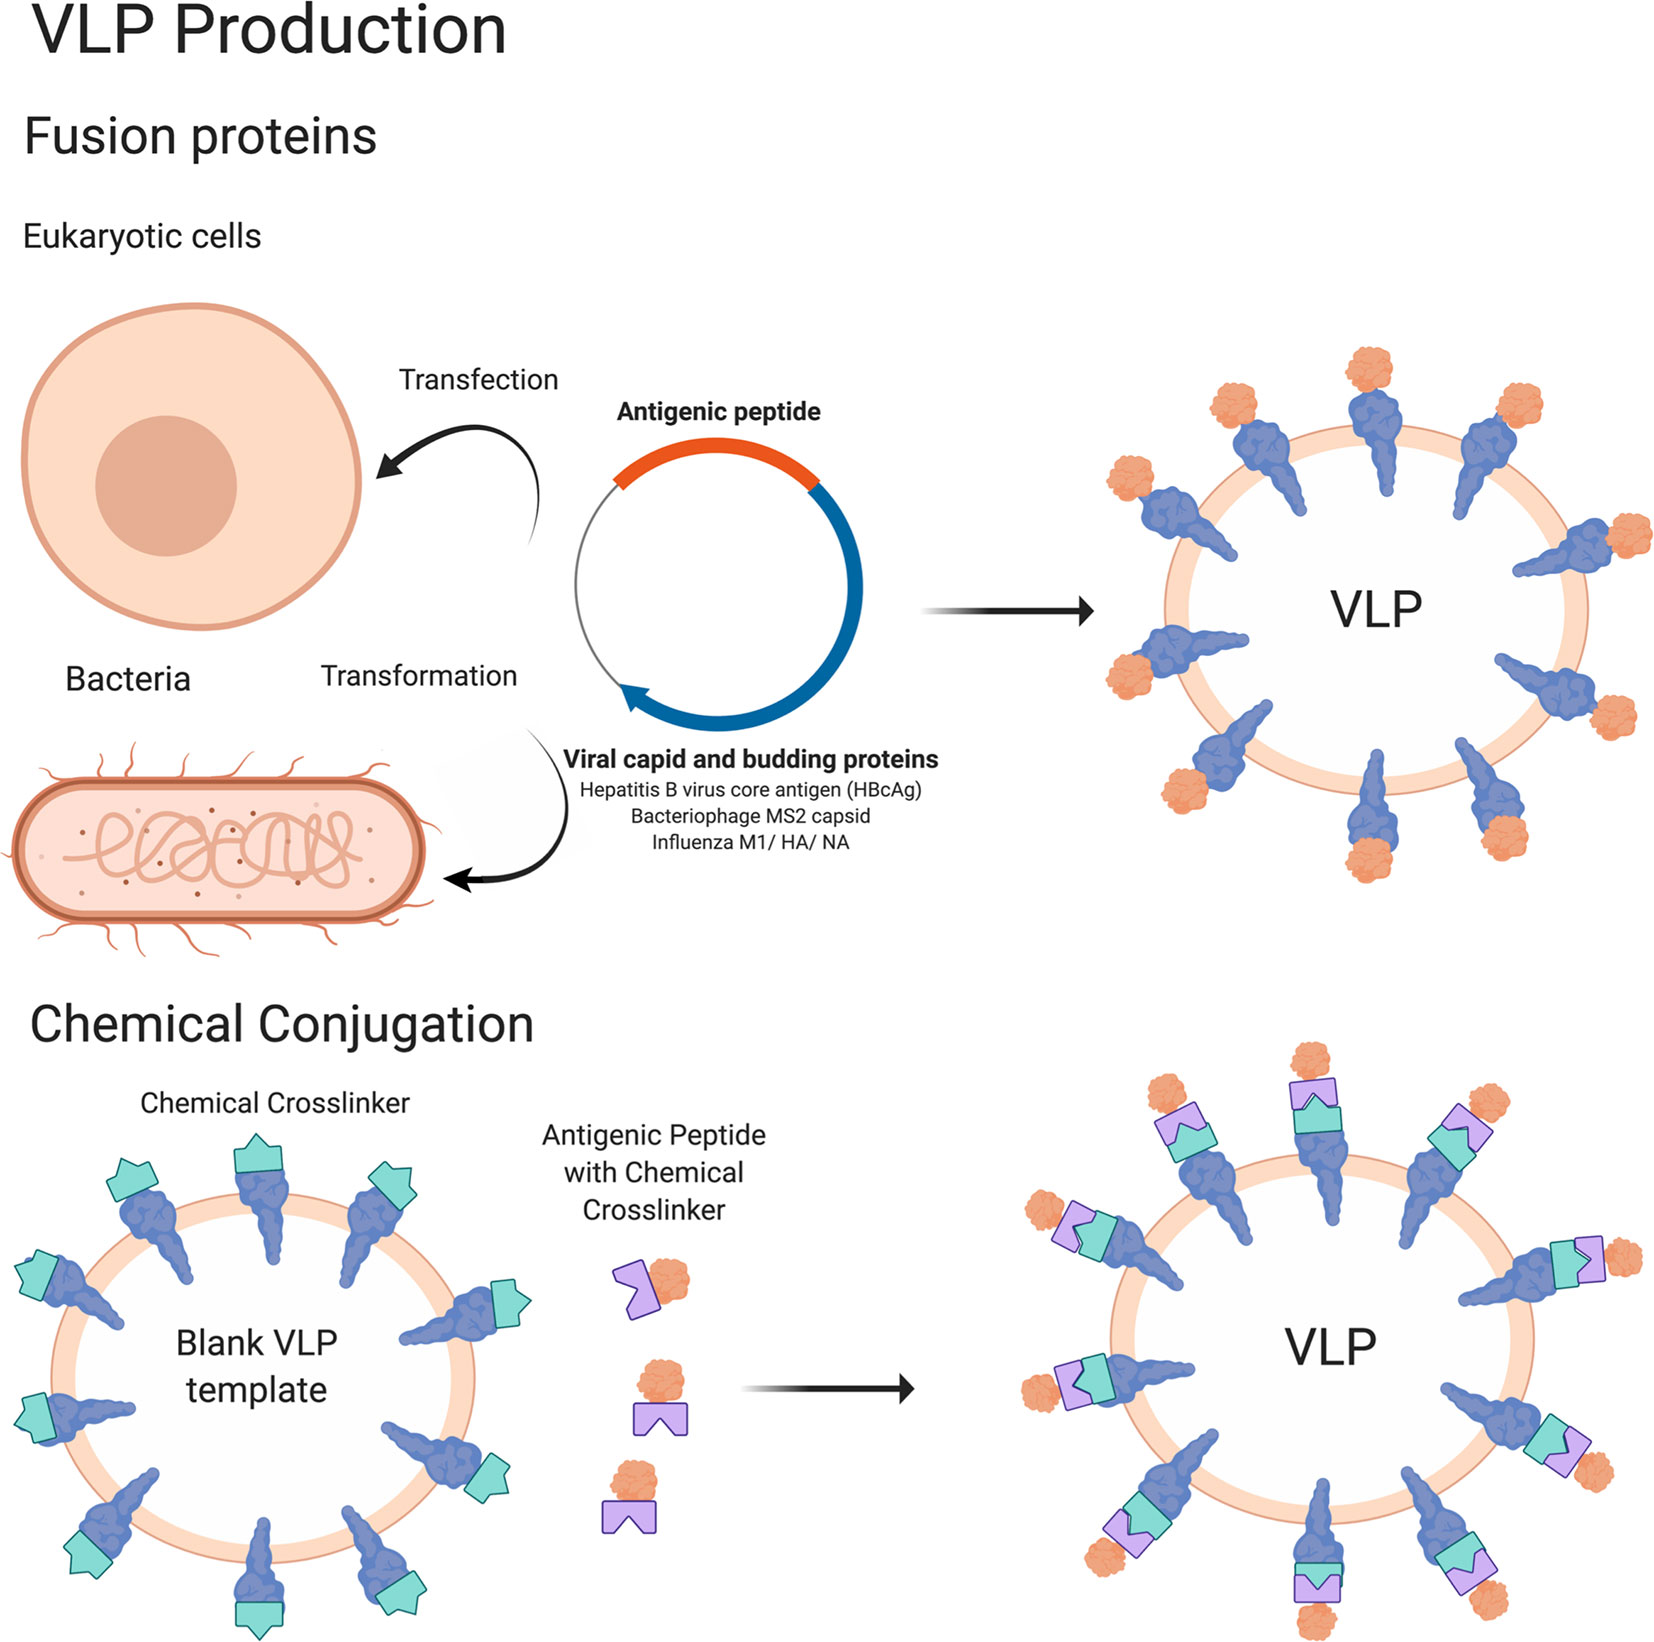 Frontiers | Emerging Concepts and Technologies in Vaccine Development